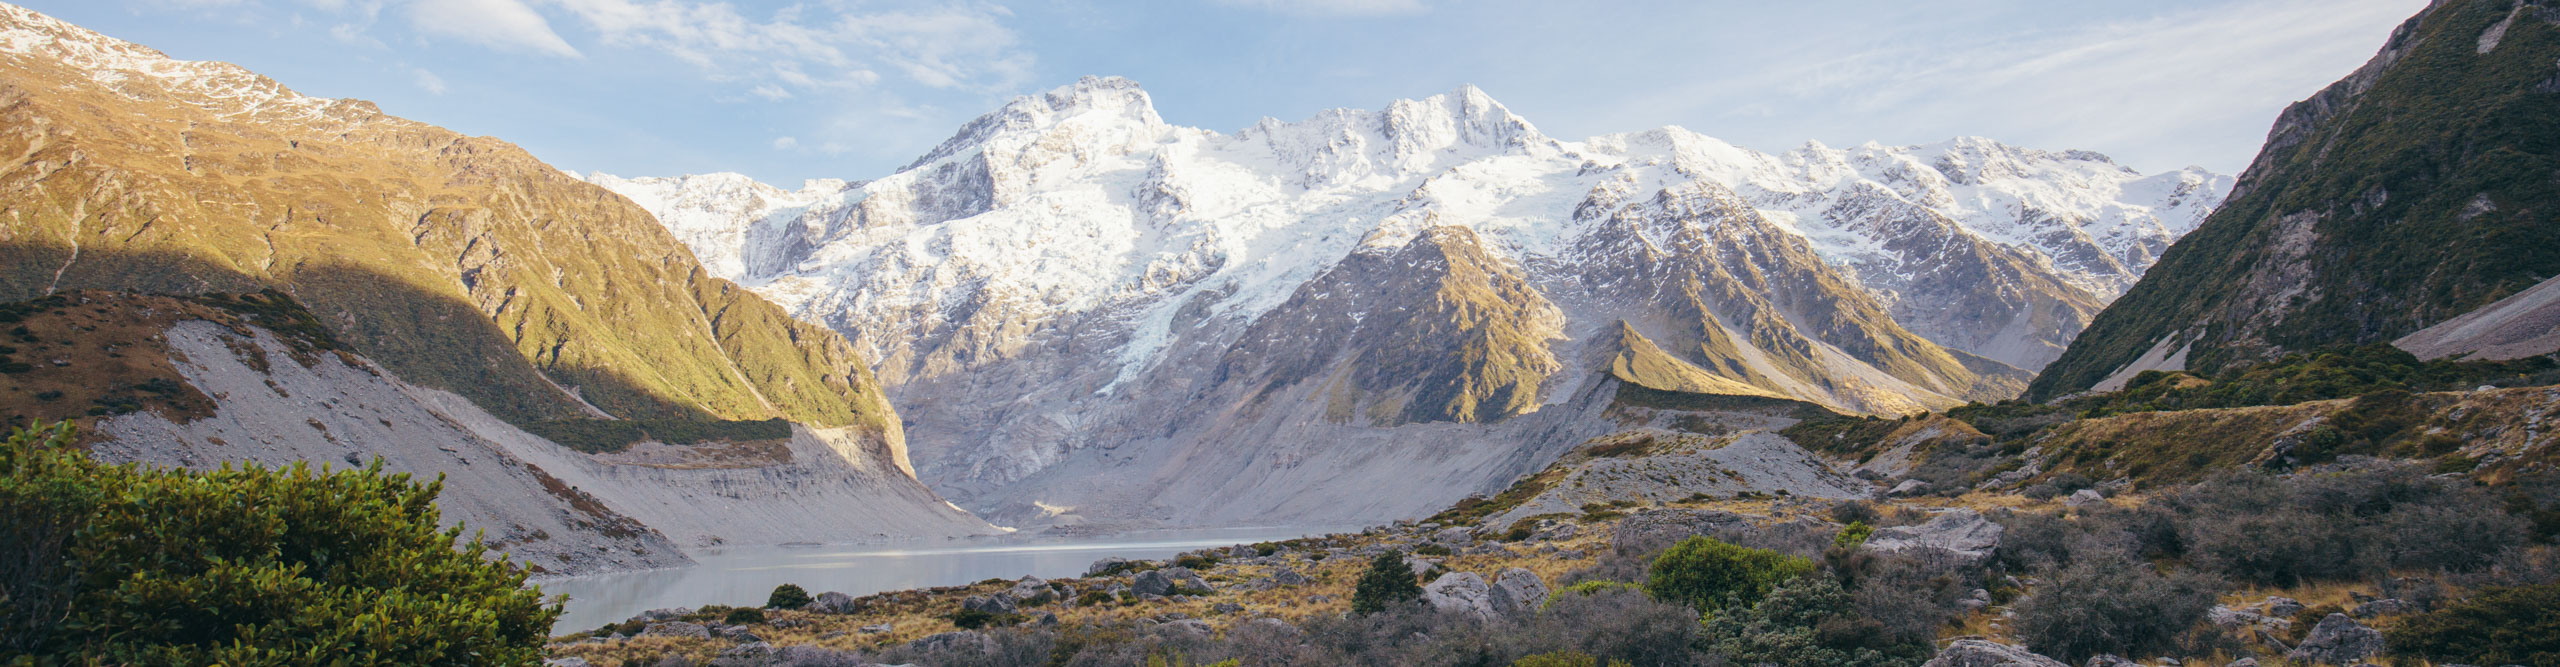 View of Mount Cook in the late afternoon sun, South Island, New Zealand